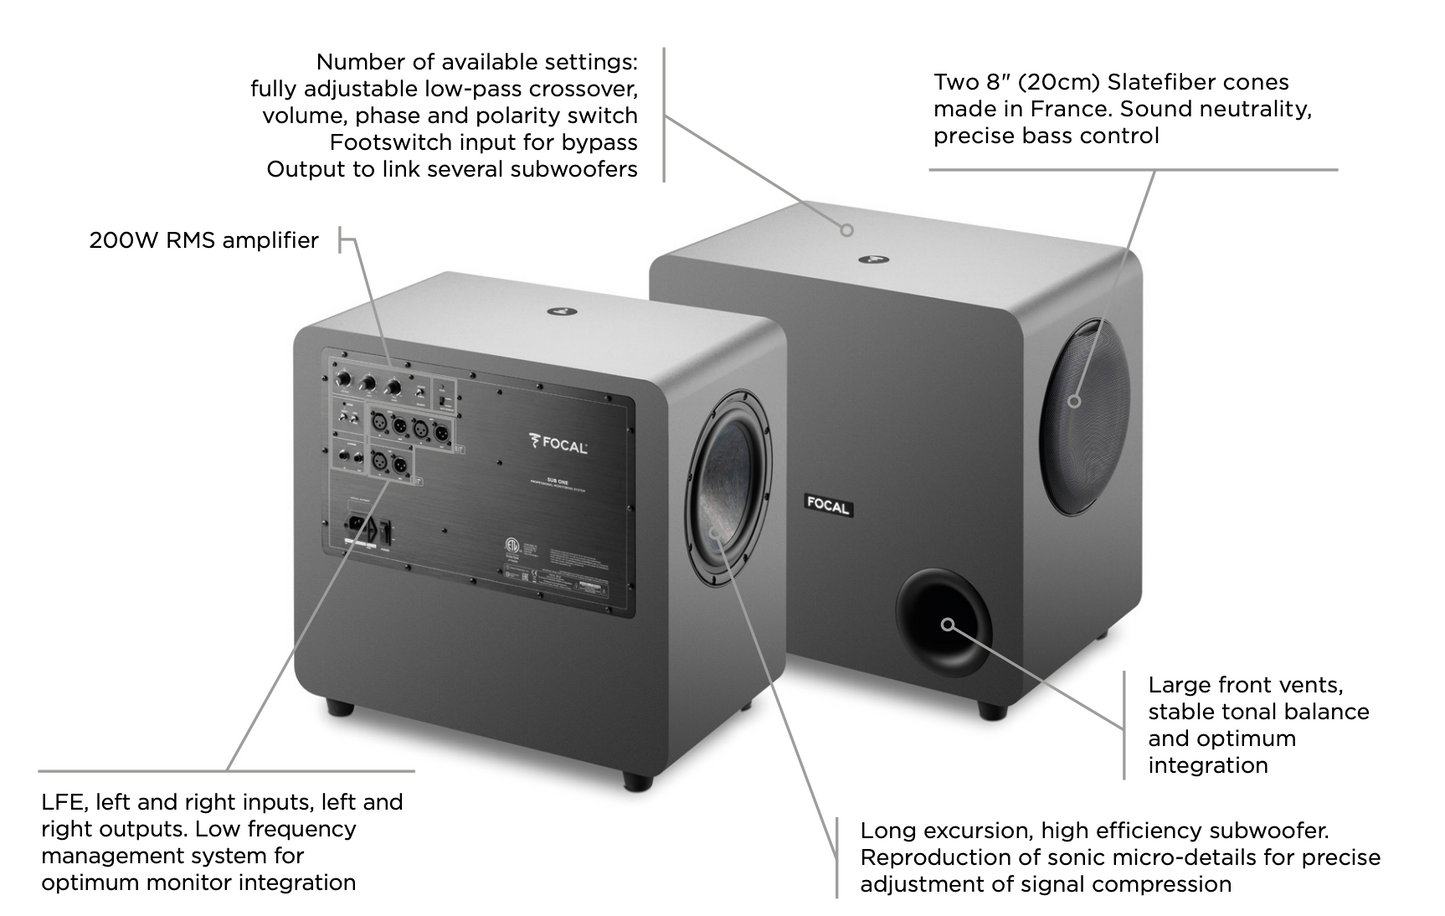 Focal Sub One Active Studio Subwoofer, image shows product features